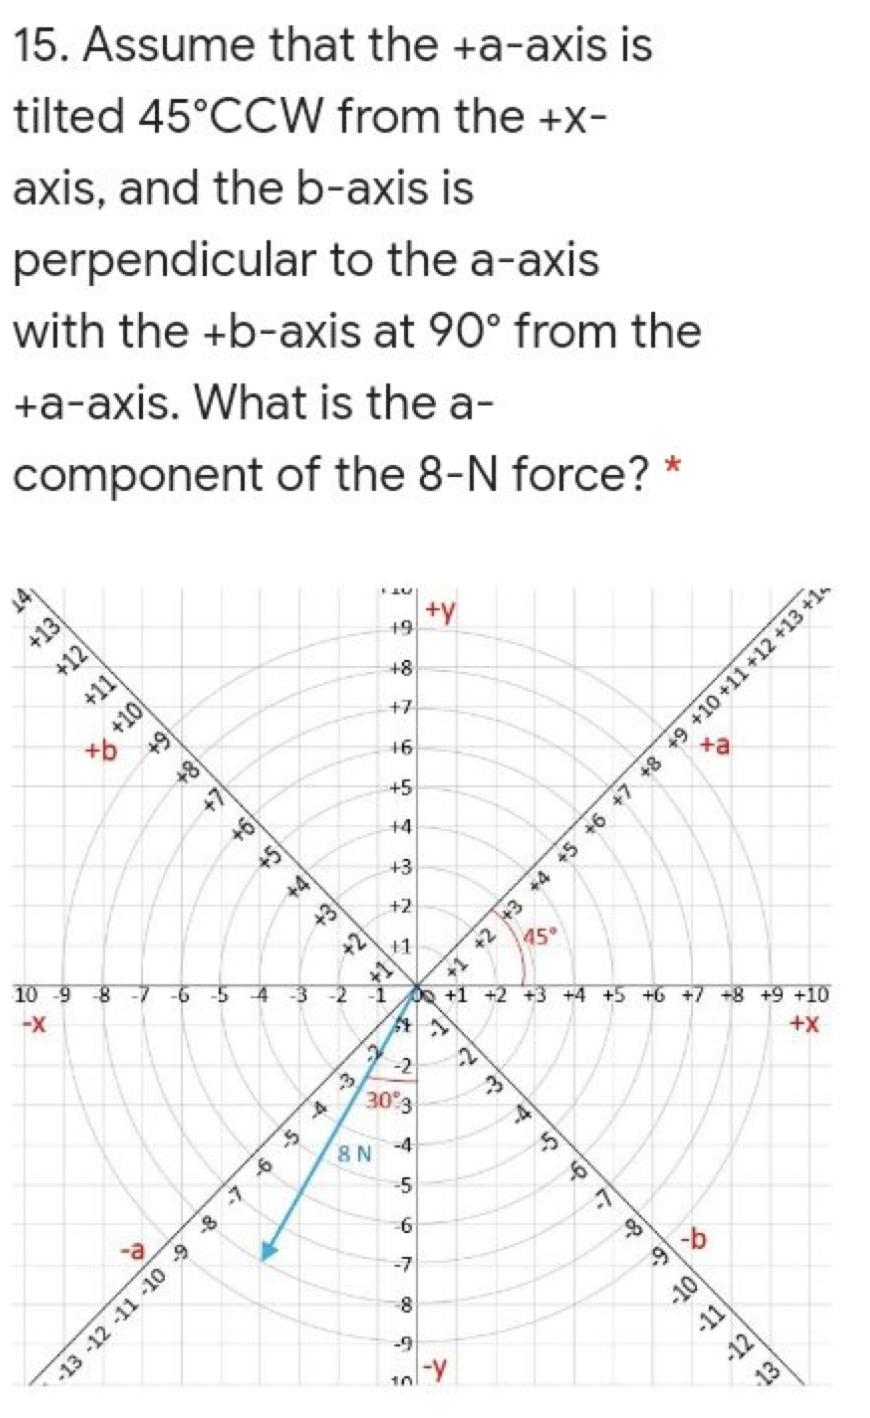 15. Assume that the +a-axis is
tilted 45°CCW from the +X-
axis, and the b-axis is
perpendicular to the a-axis
with the +b-axis at 90° from the
+a-axis. What is the a-
component of the 8-N force? *
14
+13
+12
+y
+9
+8
+11
+7
16
+5
+a
+4
+3
+4
+3
+2
10 -9
+1
45°
-8
-6
-5
-X
-3
-2
-1
+2 +3 +4 +5 +6 +7 +8 +9 +10
-2
+X
30 3
-4
8 N
-5
-a
-7
8
-9
13
-13 -12 -11 -10 -9 -8 -7 -6
4 -3 2
S-
+1 +2 +3 +4 +5 +6 +7 +8 +9 +10 +11 +12 +13 +1s
